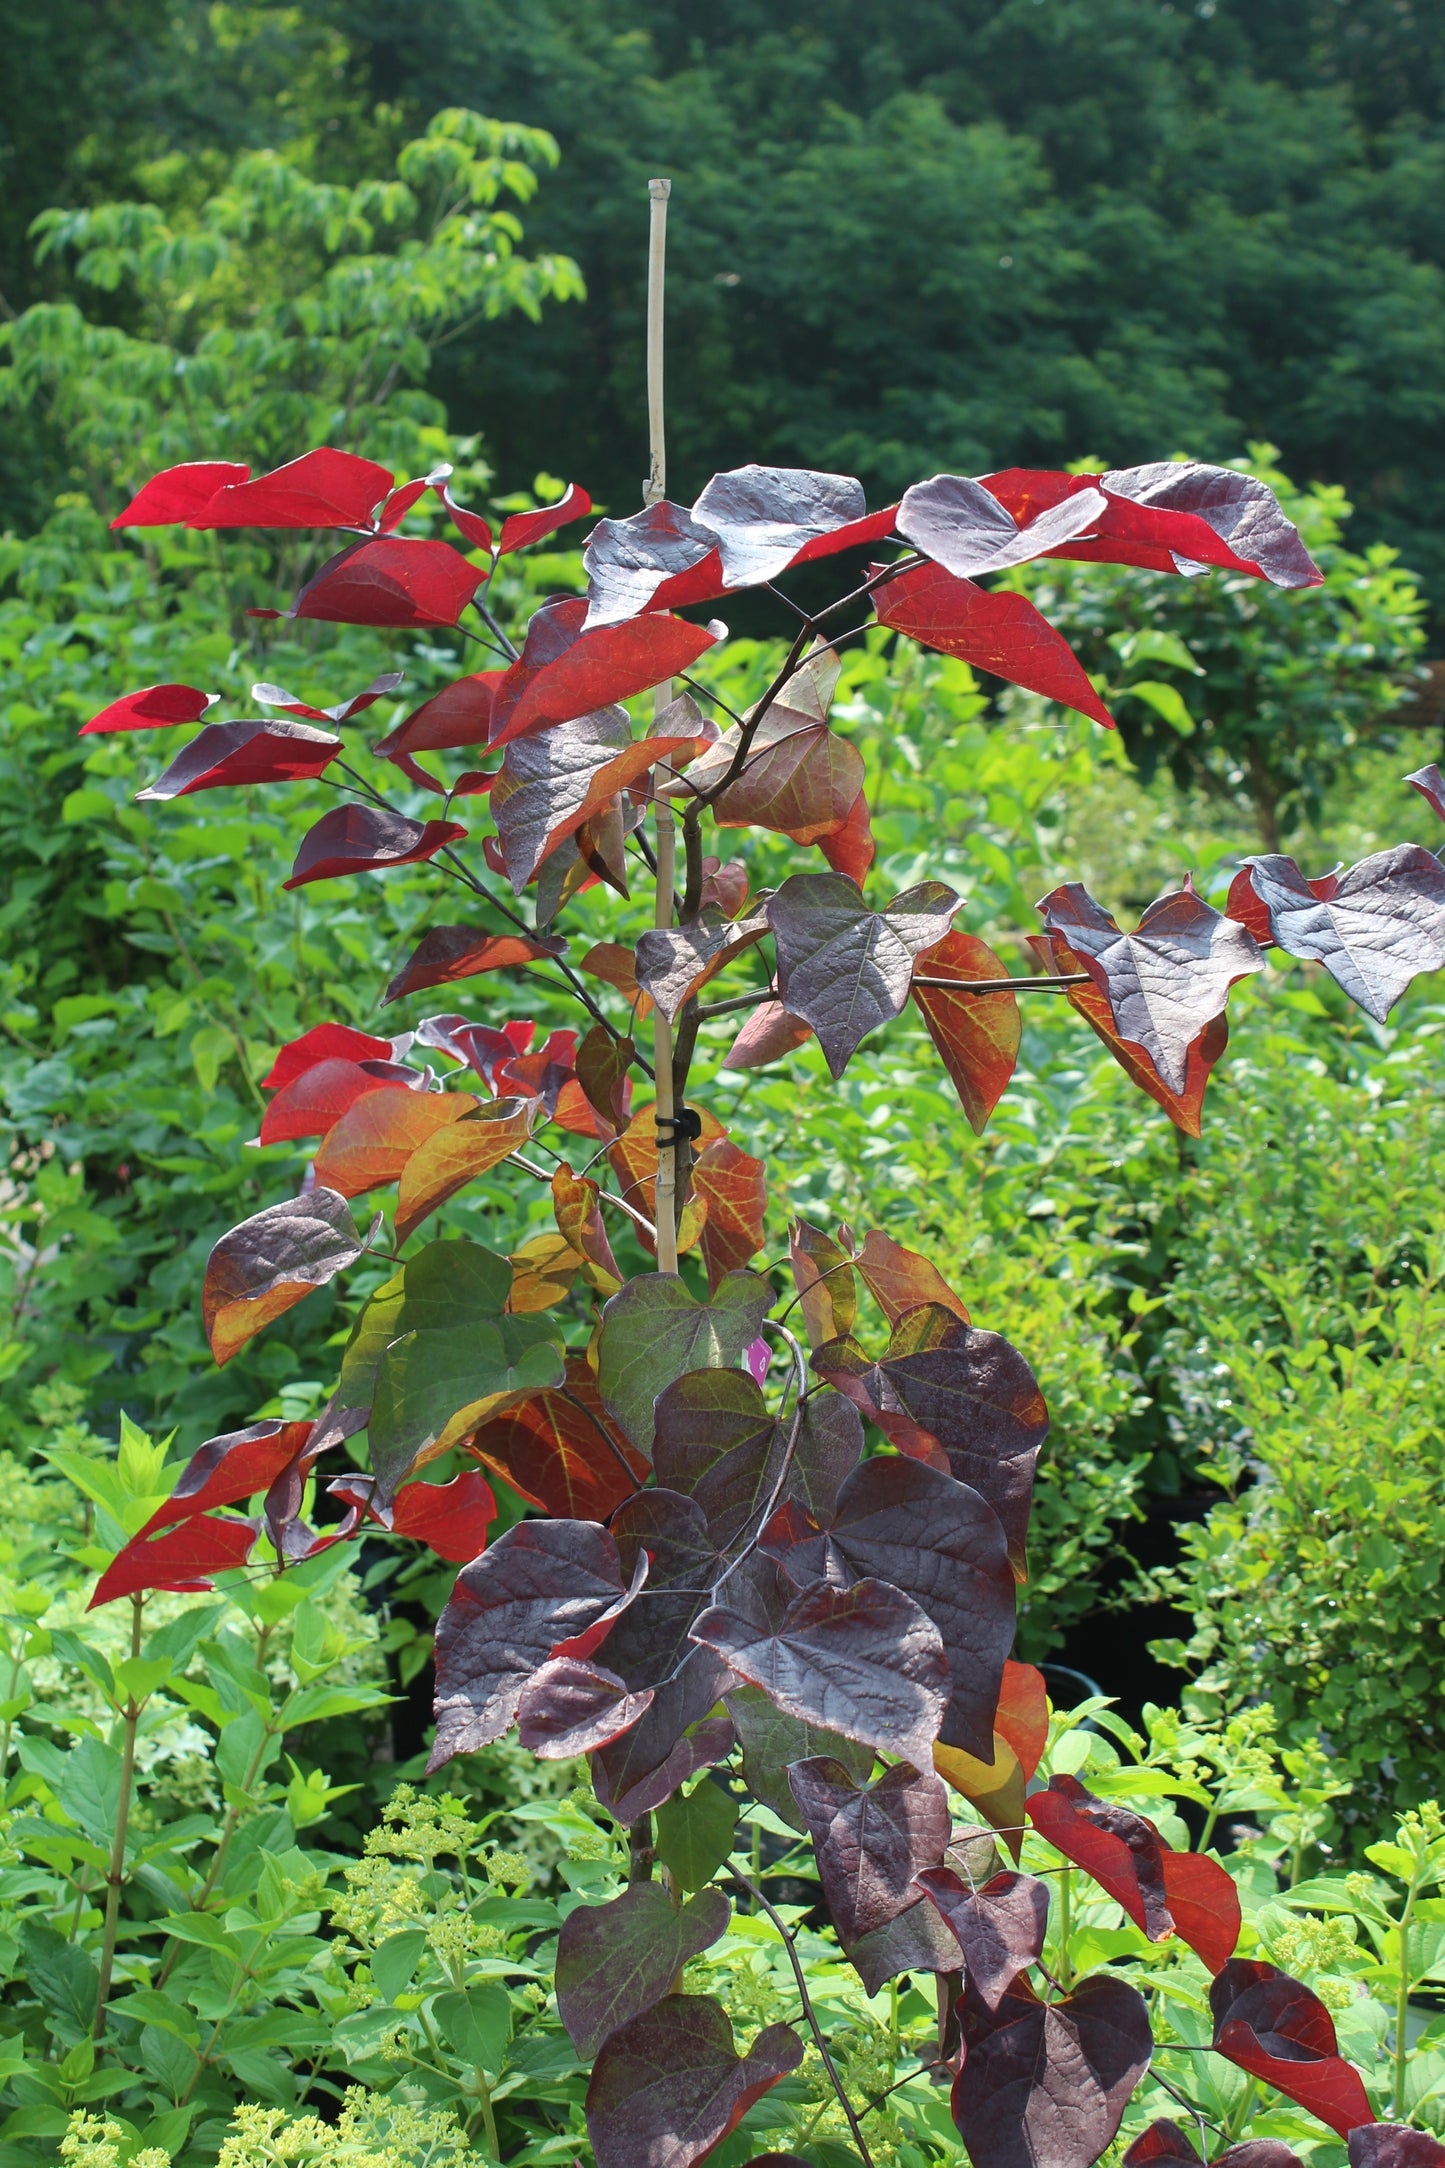 CERCIS CAN. `RUBY FALLS` 7g